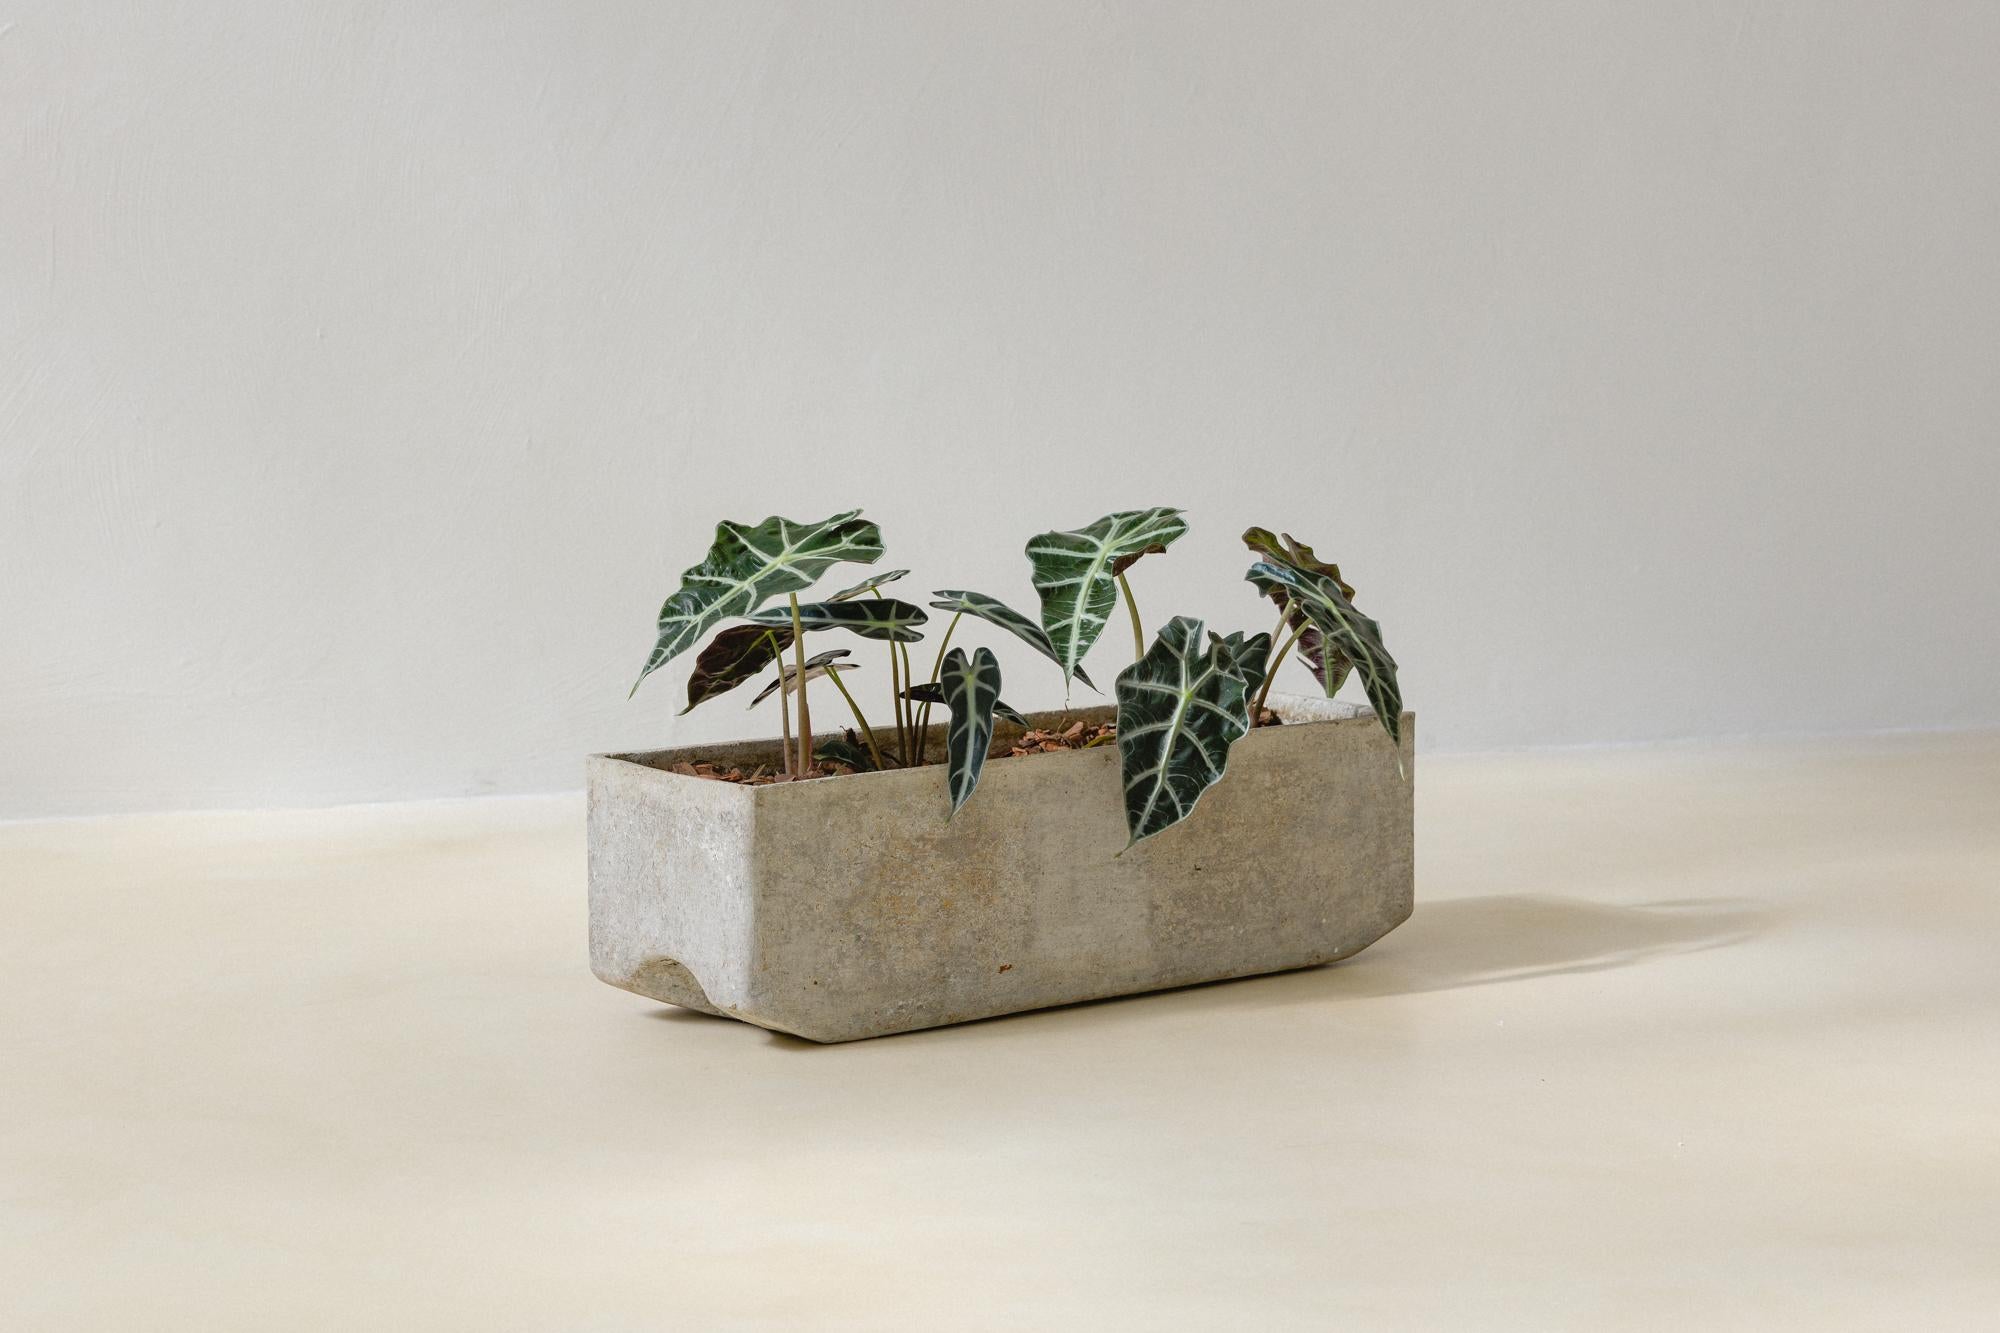 Mid-20th Century Swiss Planter by Willy Guhl, Produced by Eternit Brazil, 1960s For Sale